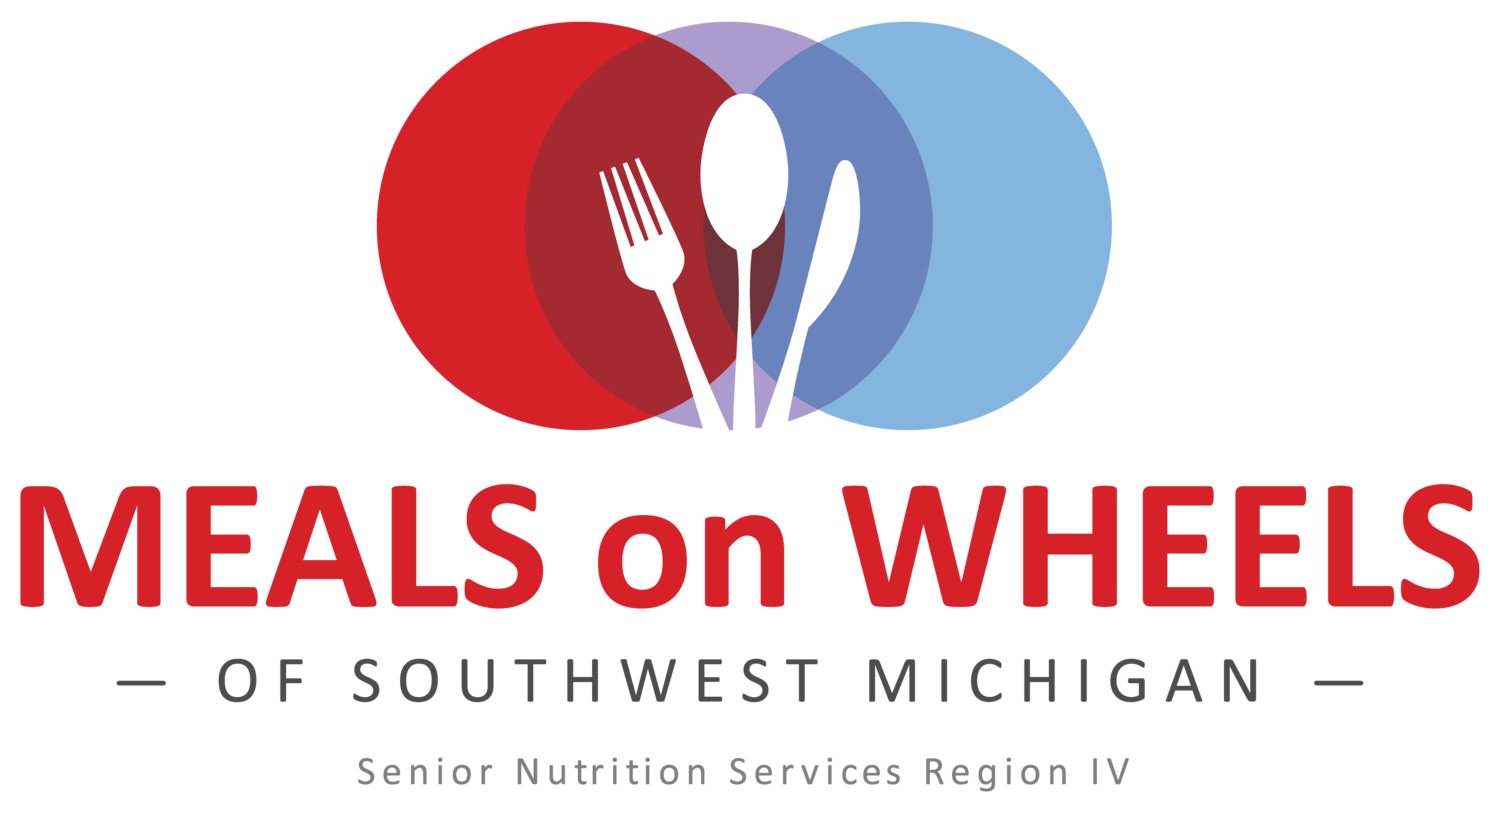 Meals on Wheels of Southwest Michigan